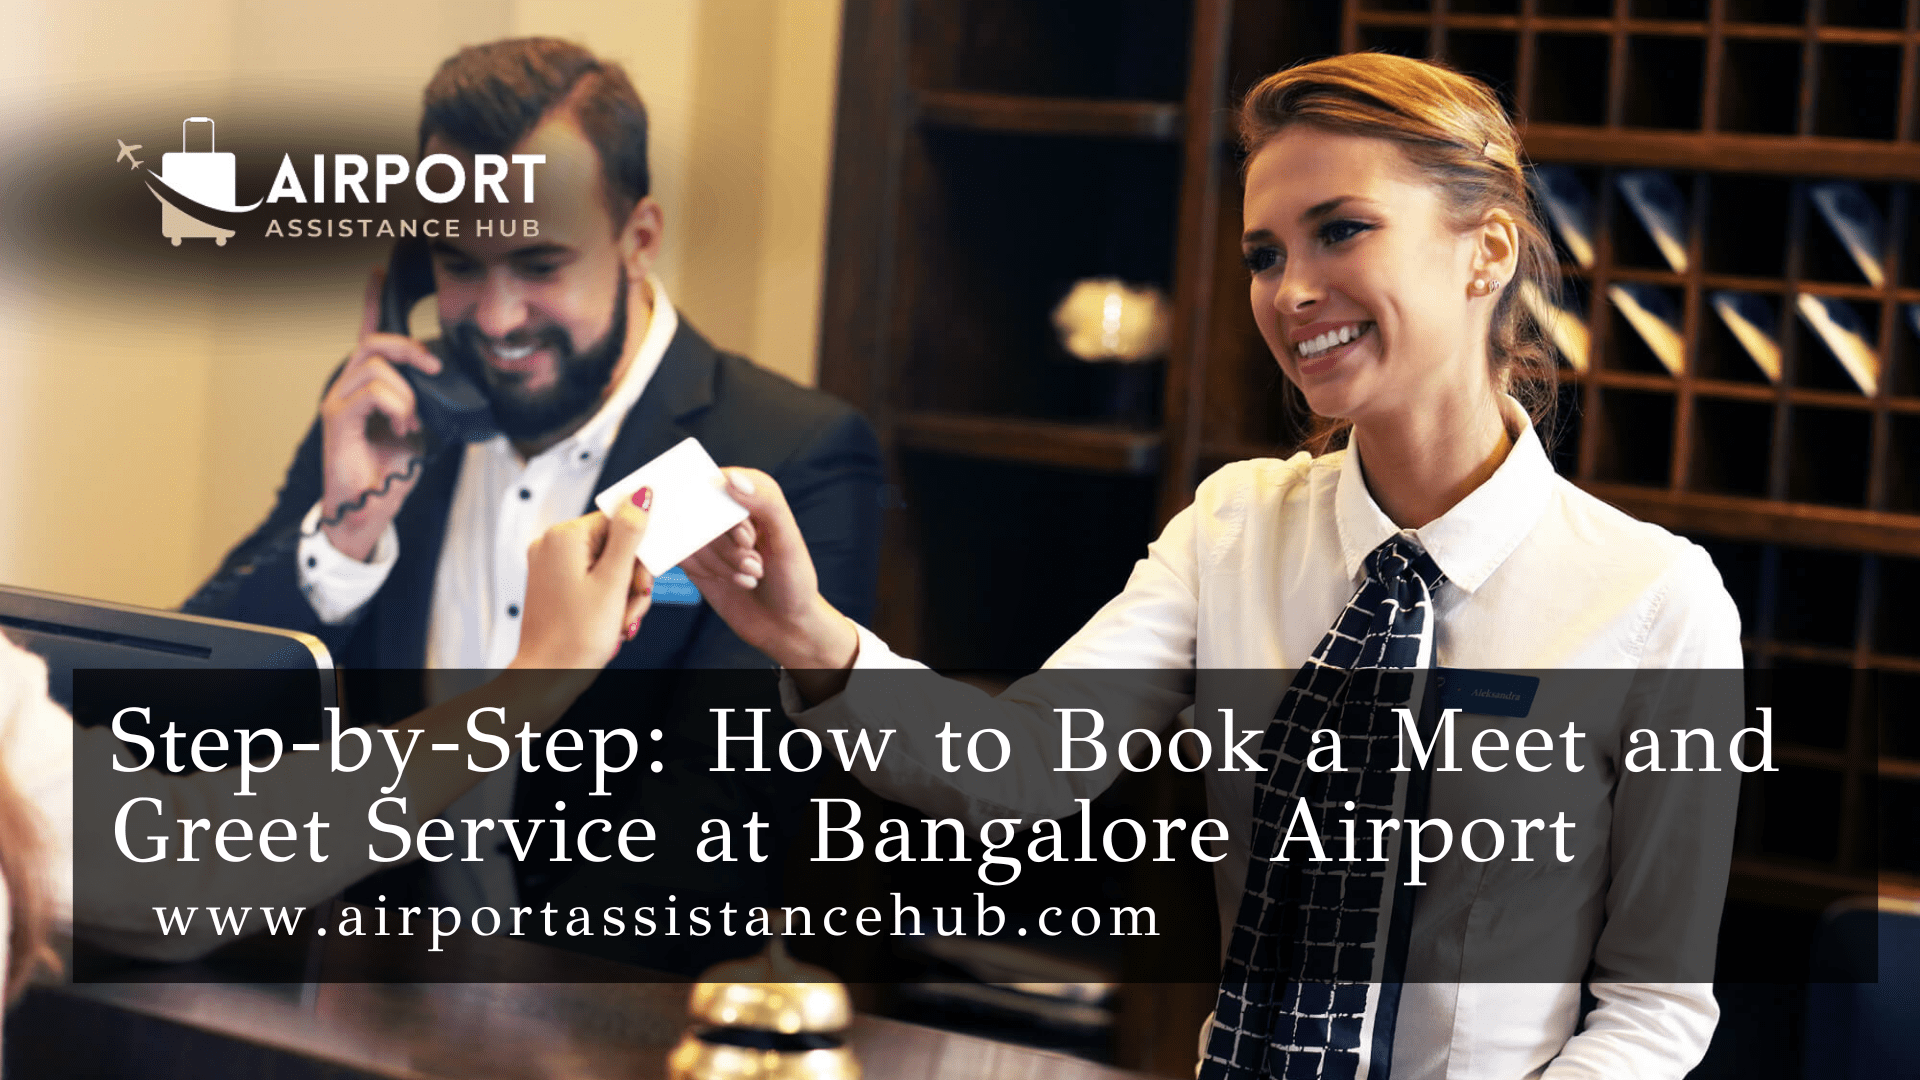 Step-by-Step: How to Book a Meet and Greet Service at Bangalore Airport